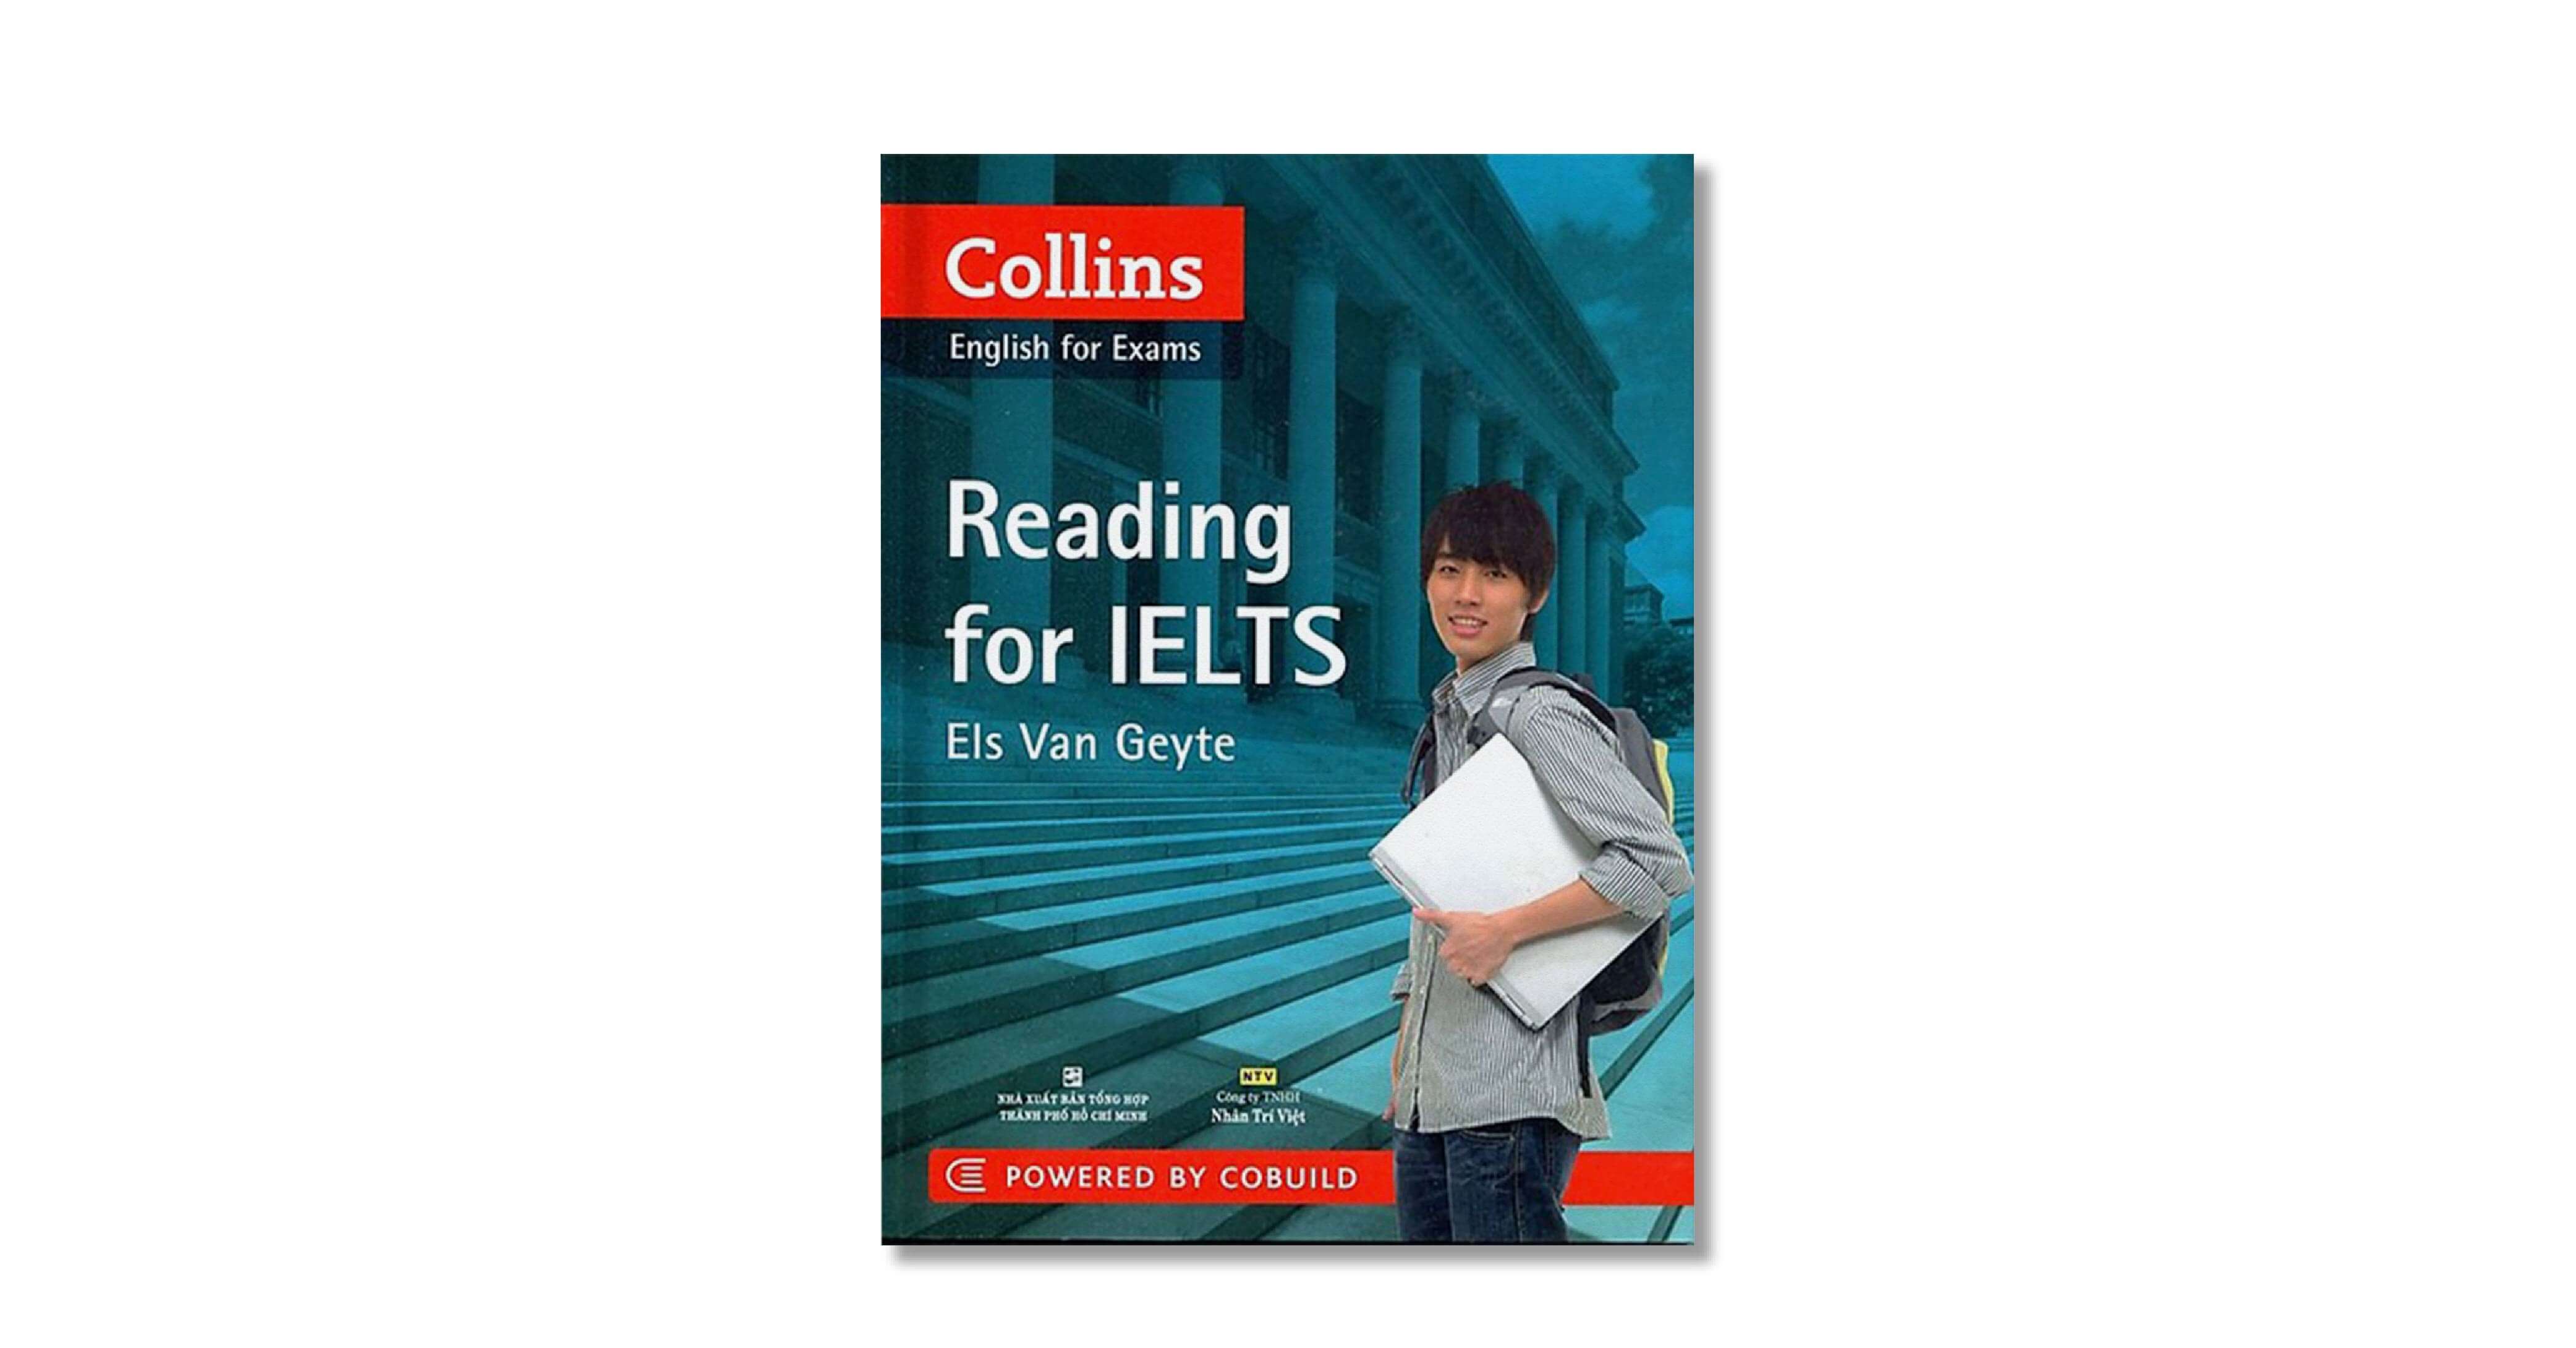 collins-reading-for-ielts-review-chi-tiet-va-huong-dan-su-dung-sach-